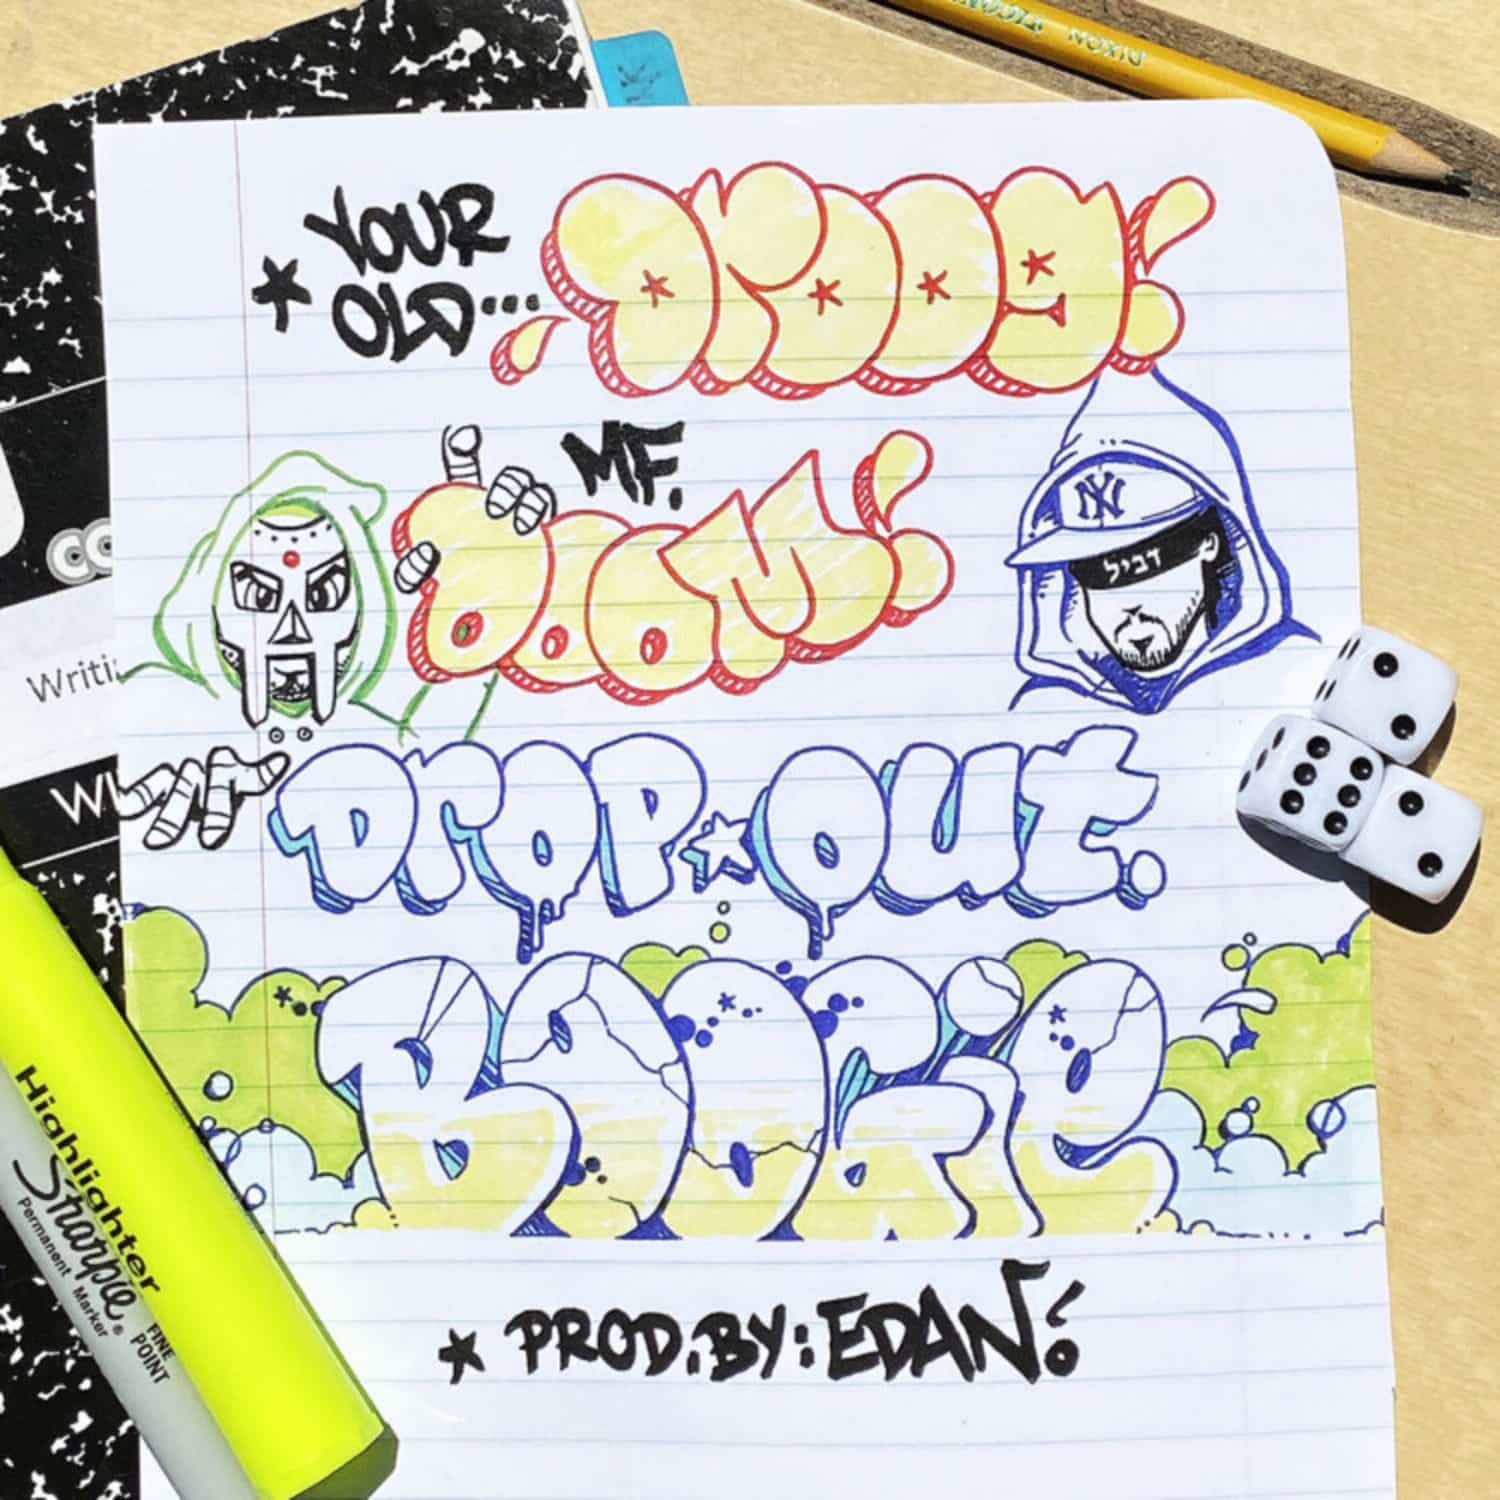 Your Old Droog & MF Doom - DROPOUT BOOGIE 